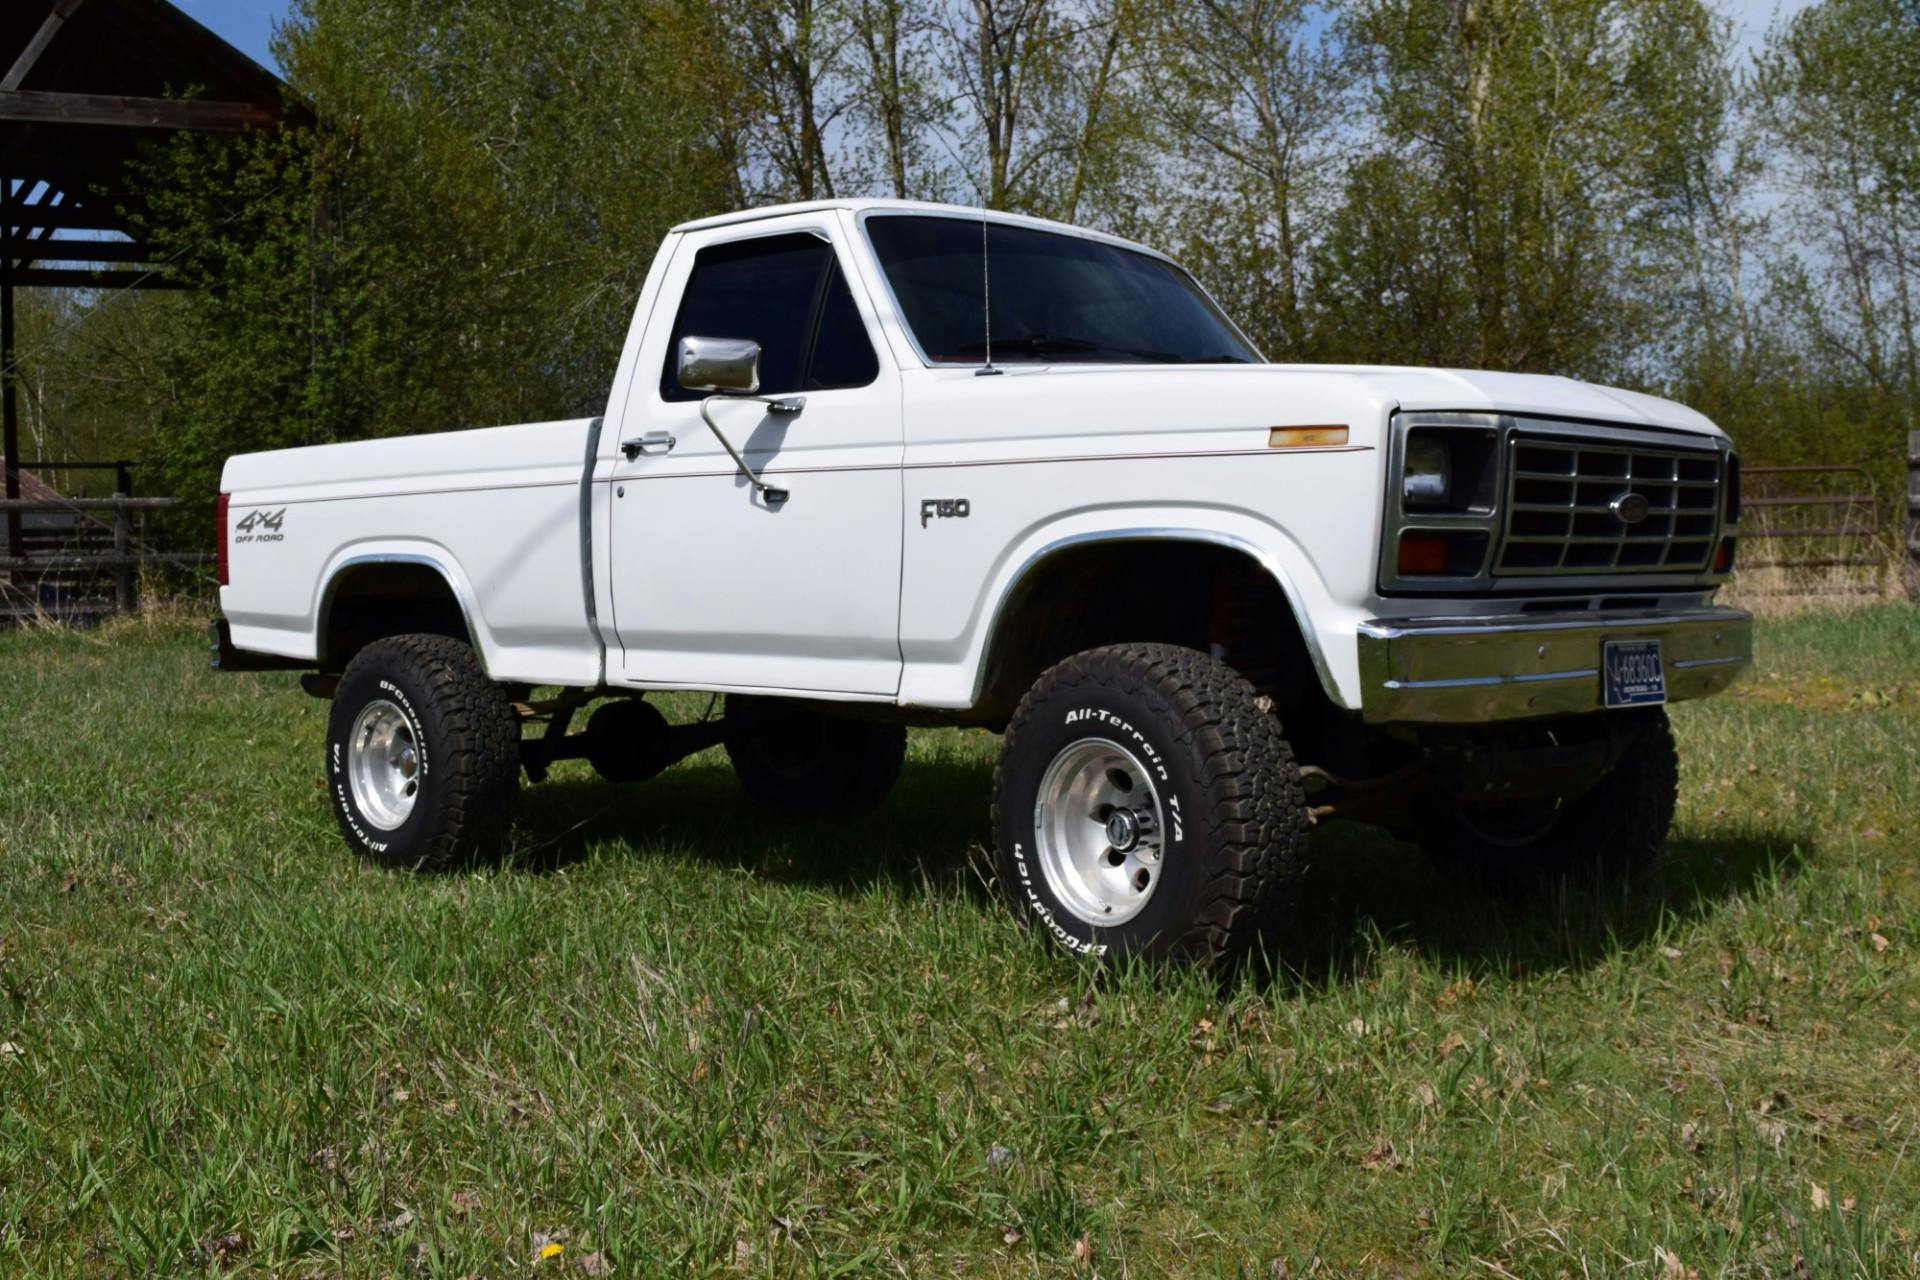 Ford-F150-1985-2024-02-23T16:33:11.355Z